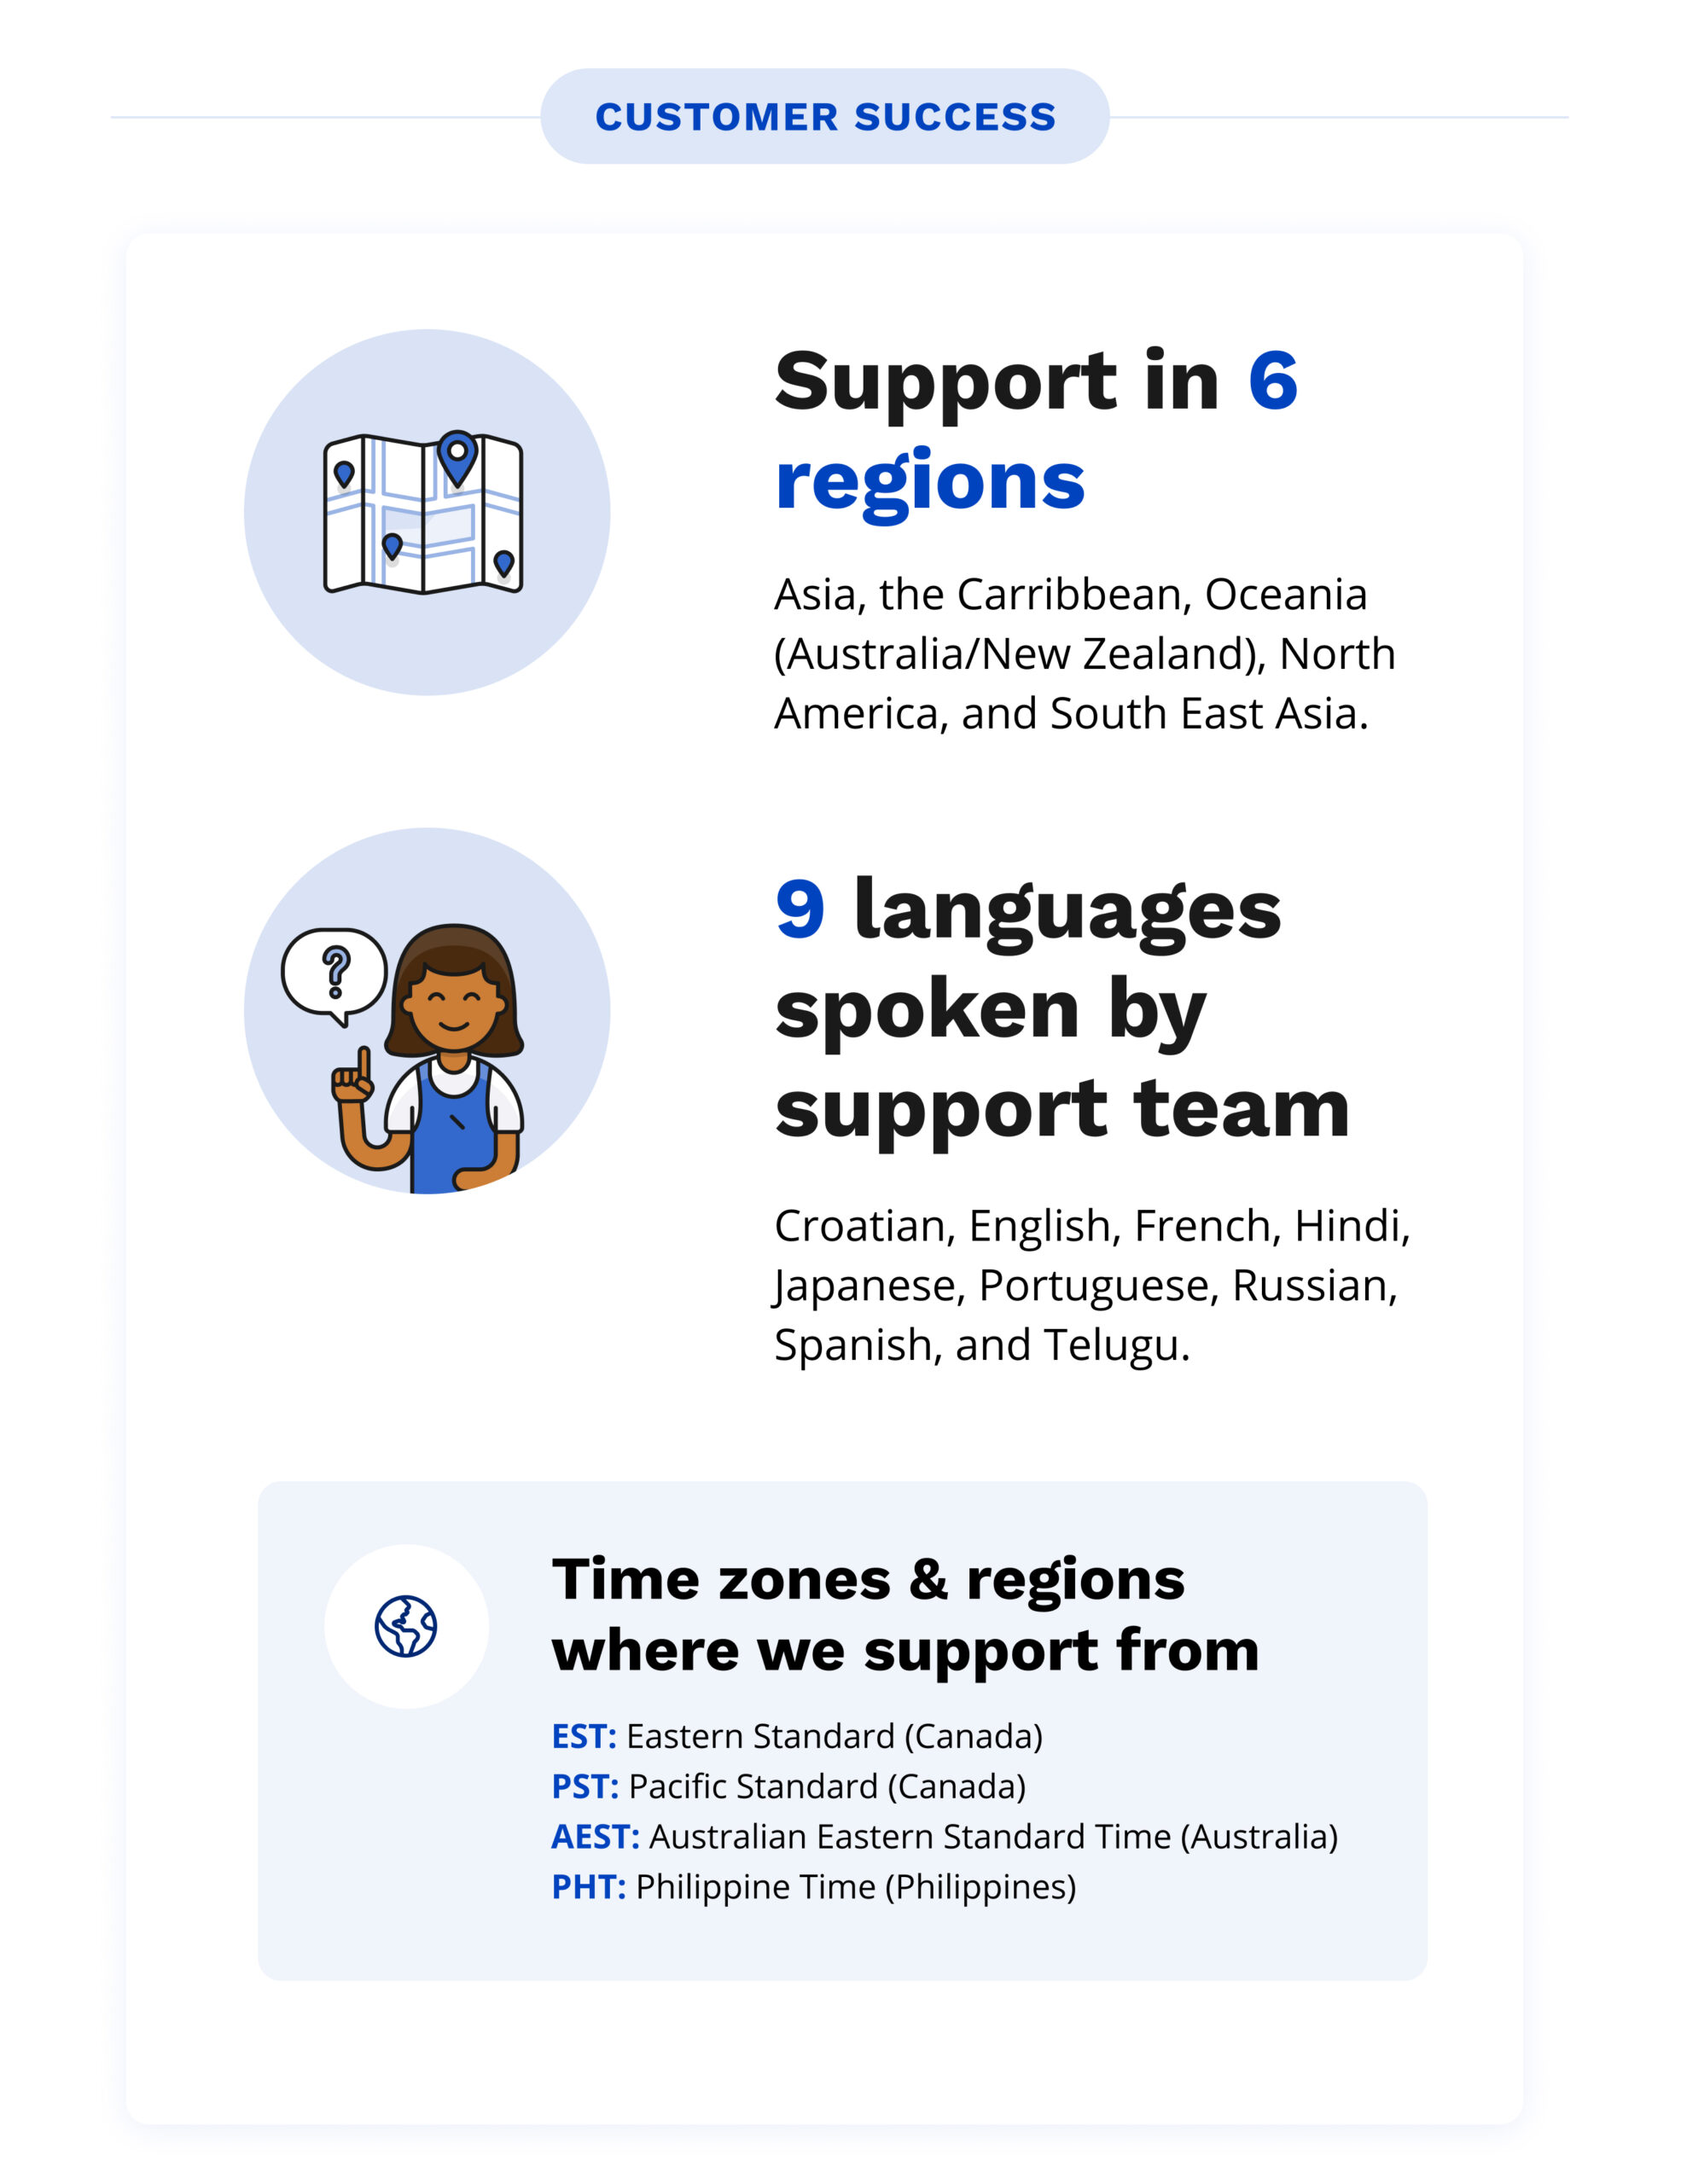 Support in 6 regions: Asia, the Carribbean, Oceania (Australia/New Zealand), North America, and South East Asia, 9 languages spoken by support team: Croatian, English, French, Hindi, Japanese, Portuguese, Russian, Spanish, and Telugu. Time zones & regions  where we support from:
EST: Eastern Standard (Canada)
PST: Pacific Standard (Canada)
AEST: Australian Eastern Standard Time (Australia)
PHT: Philippine Time (Philippines)